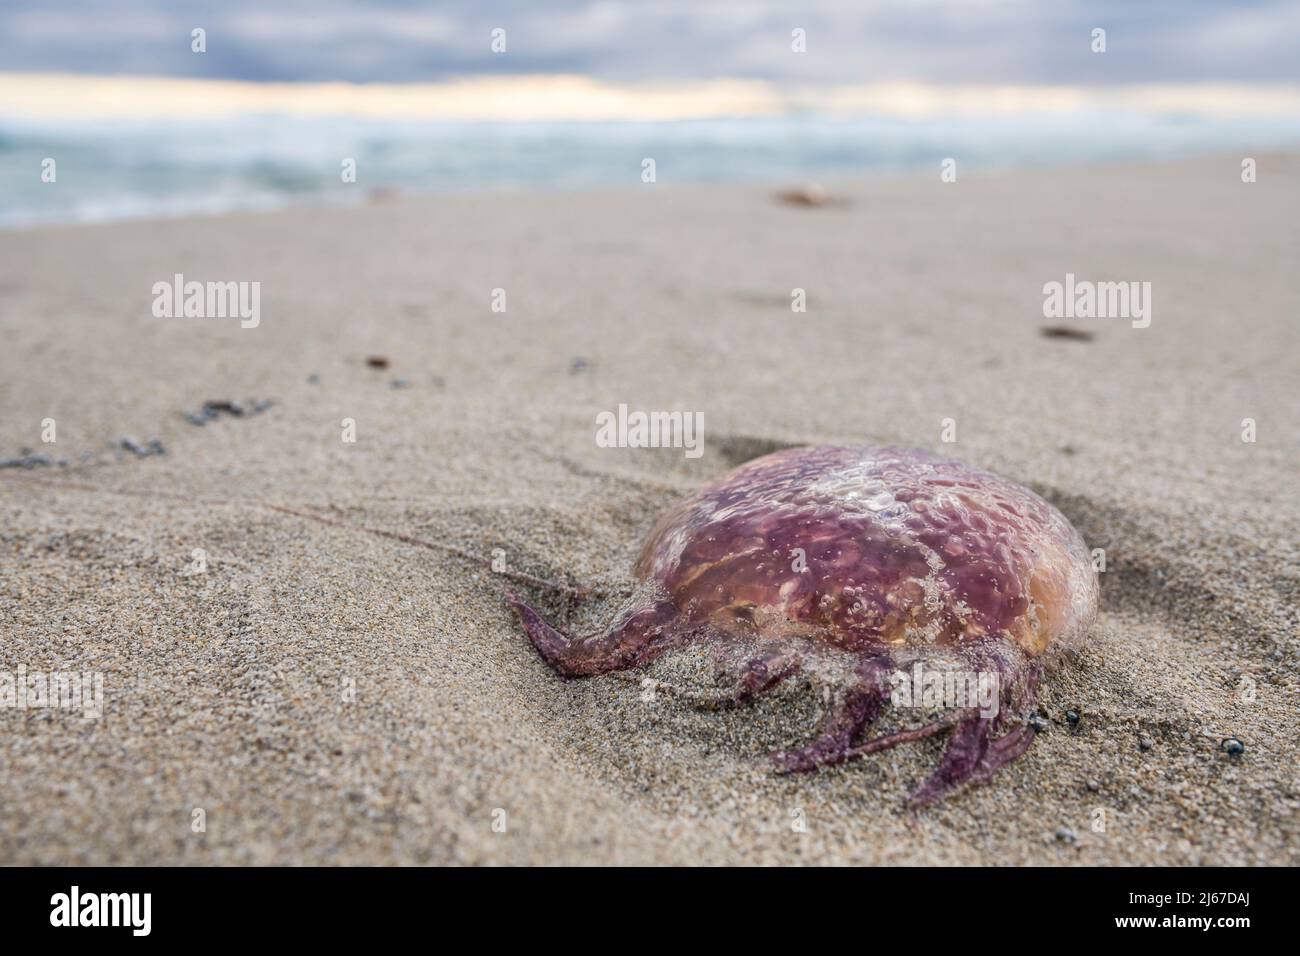 Mauve stinger (Pelagia noctiluca) is a jellyfish in the family Pelagiidae, washed up en masse on the beach. Stock Photo